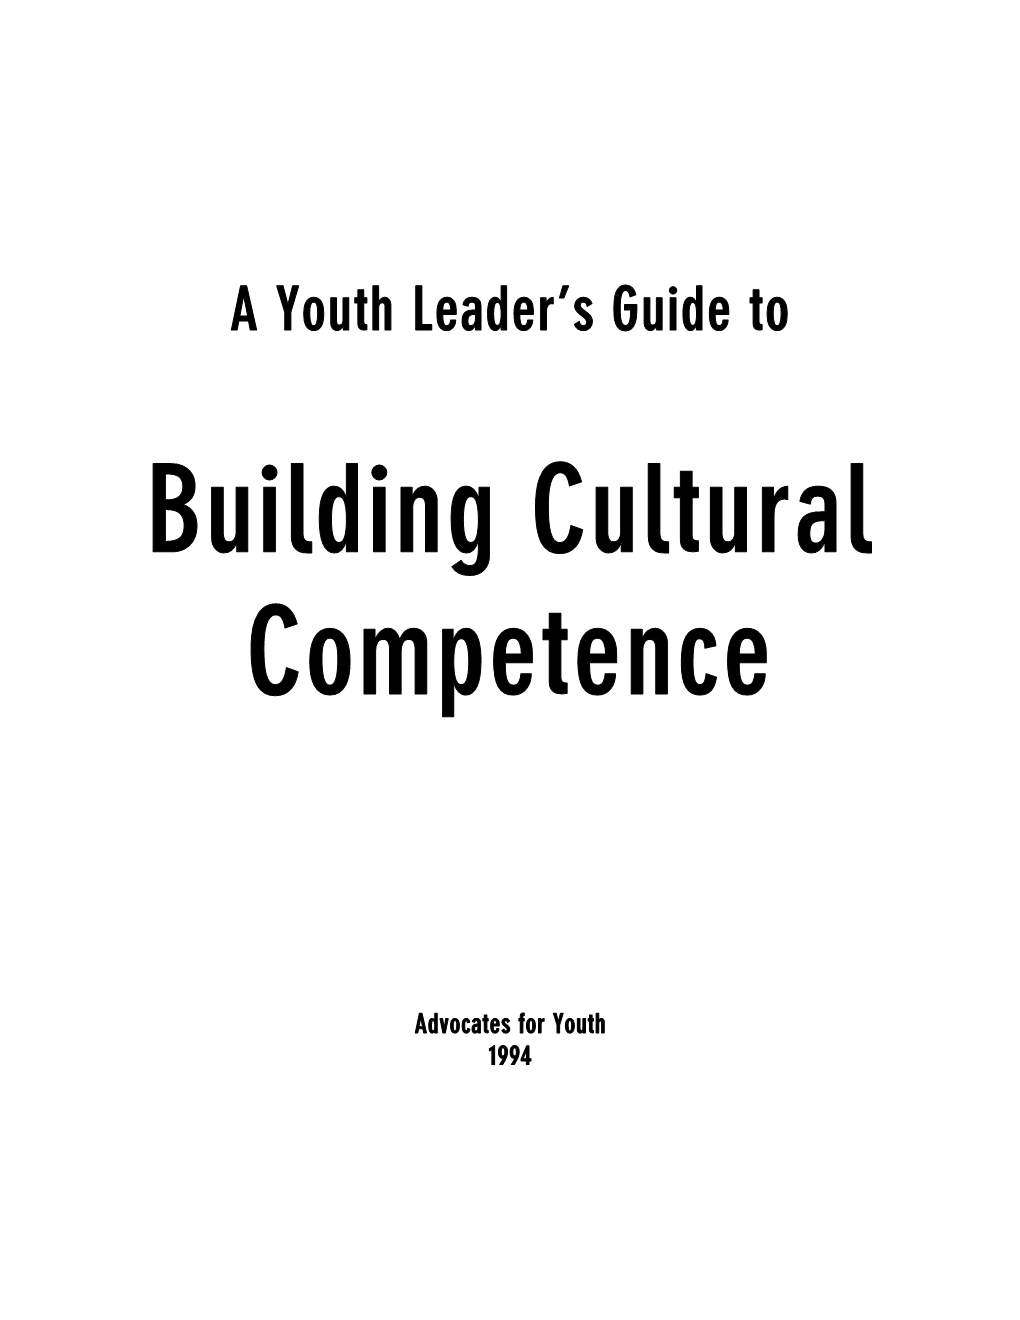 A Youth Leader's Guide to Building Cultural Competence by Susan A